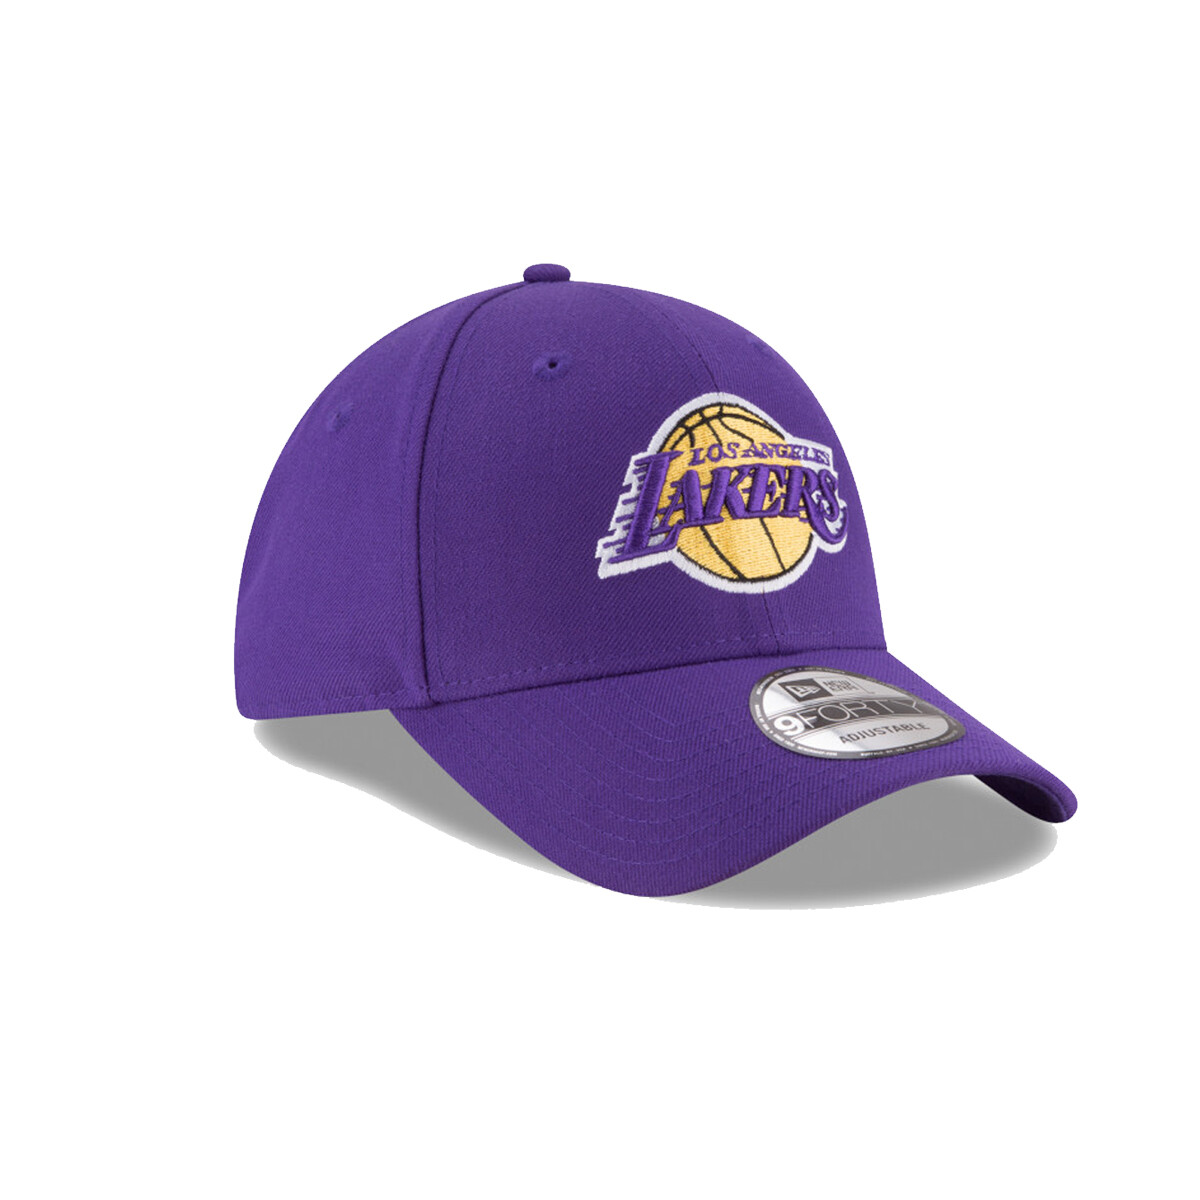 Gorro New Era - 11405605 - League Los Angeles Lakers 9Forty - VIOLET 